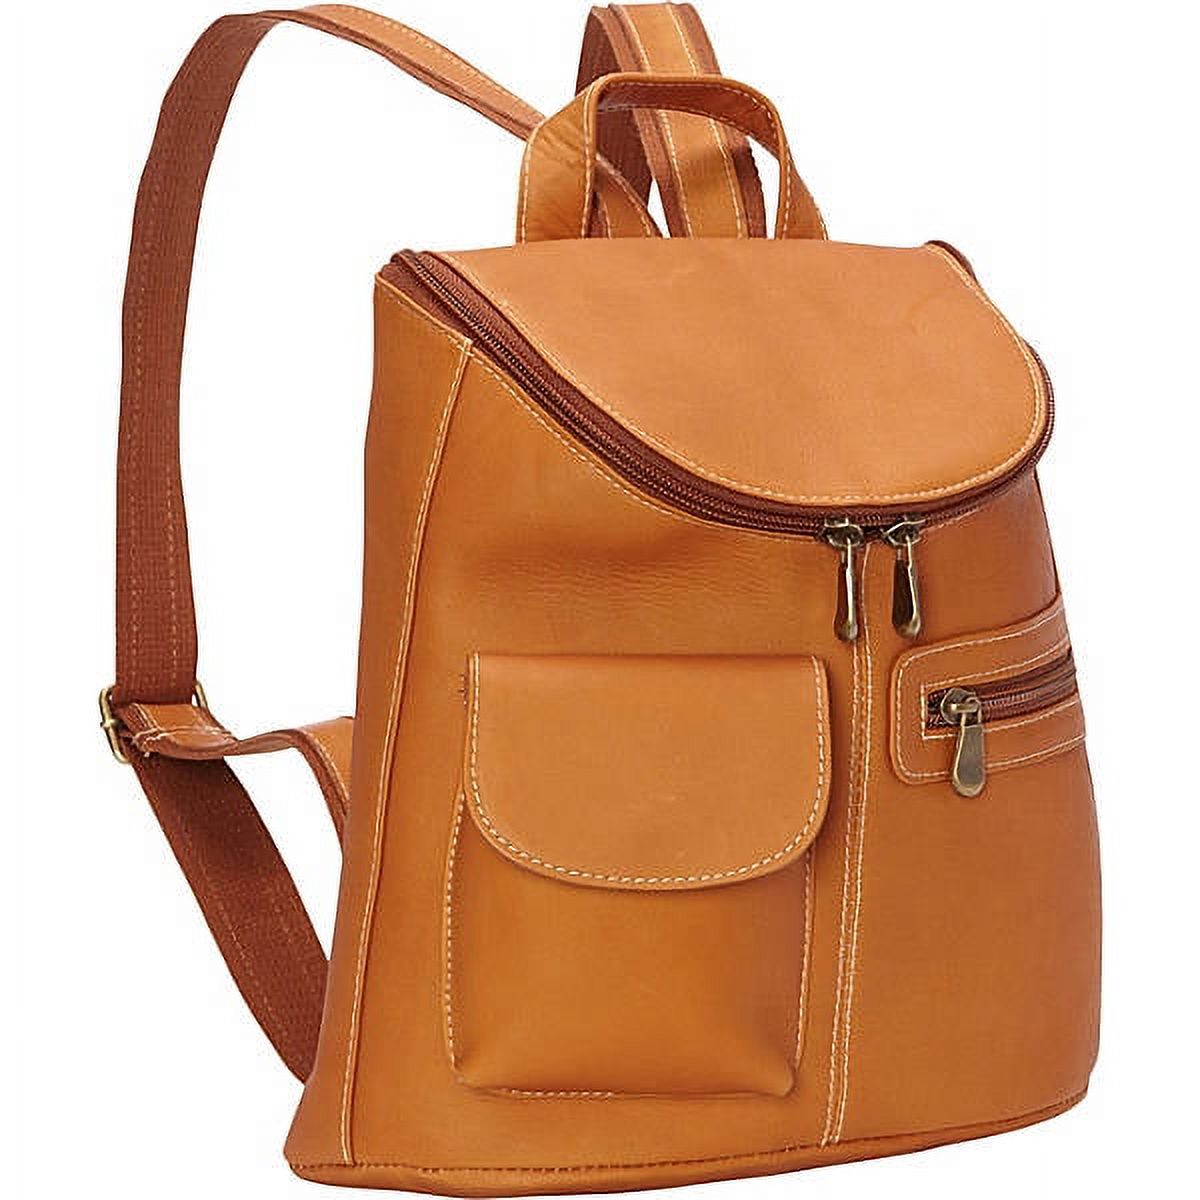 Le Donne Leather Lafayette Classic Backpack LD-9108 - image 1 of 5